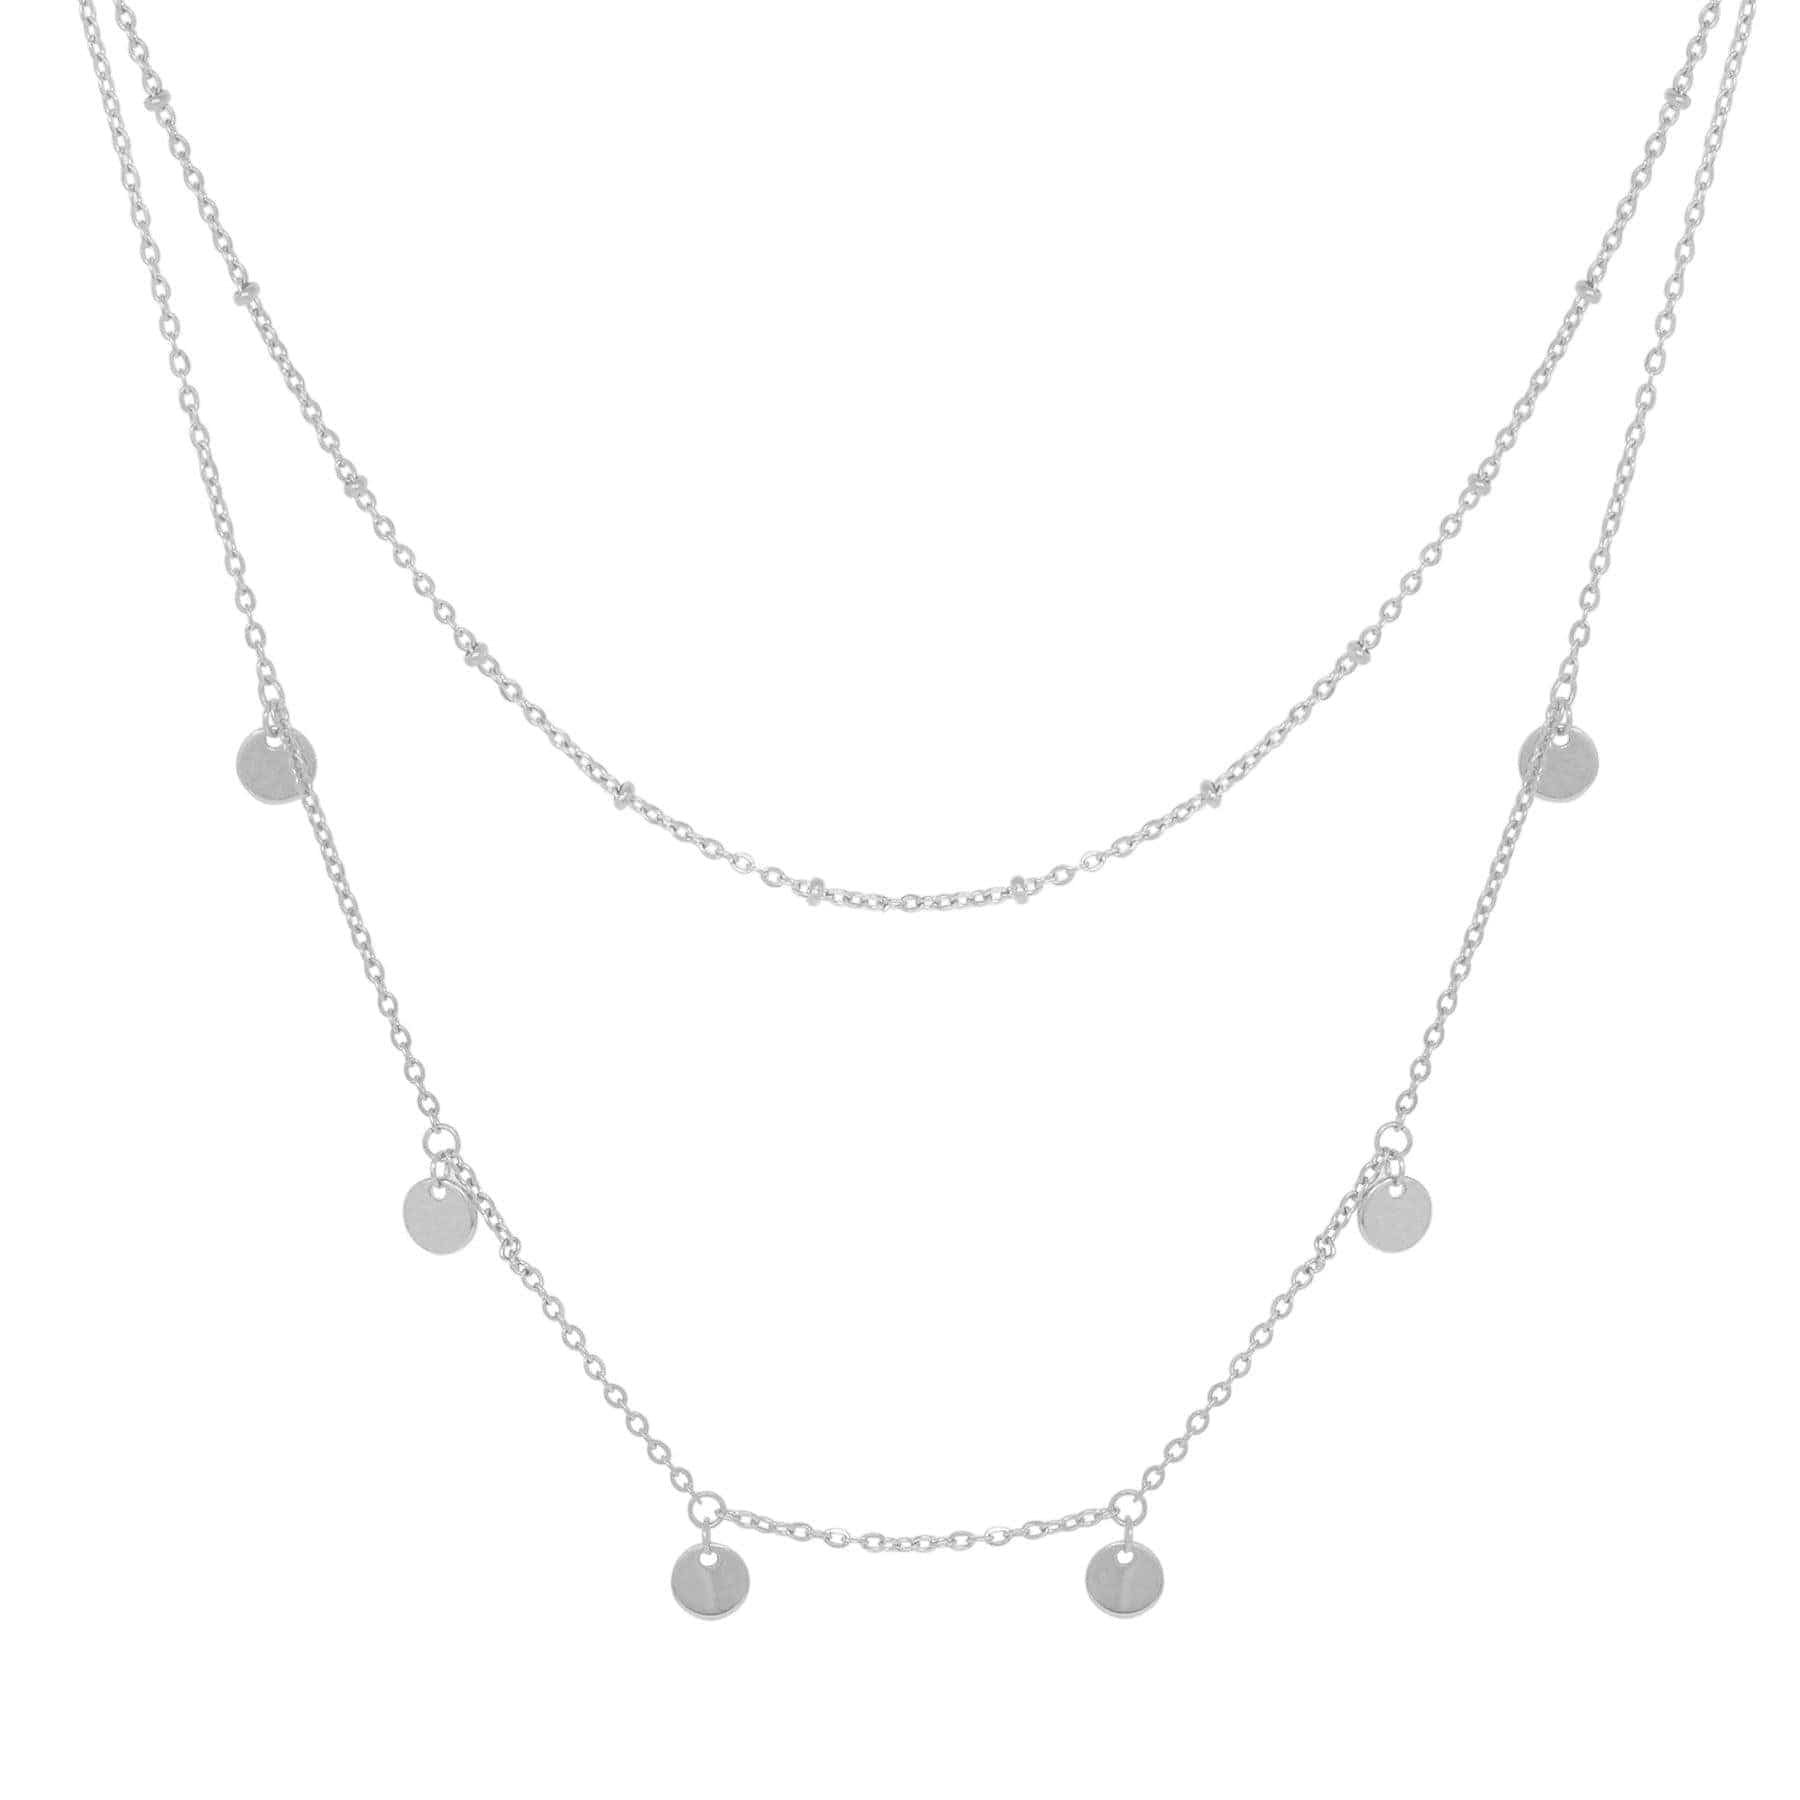 BohoMoon Stainless Steel Thea Layered Necklace Silver